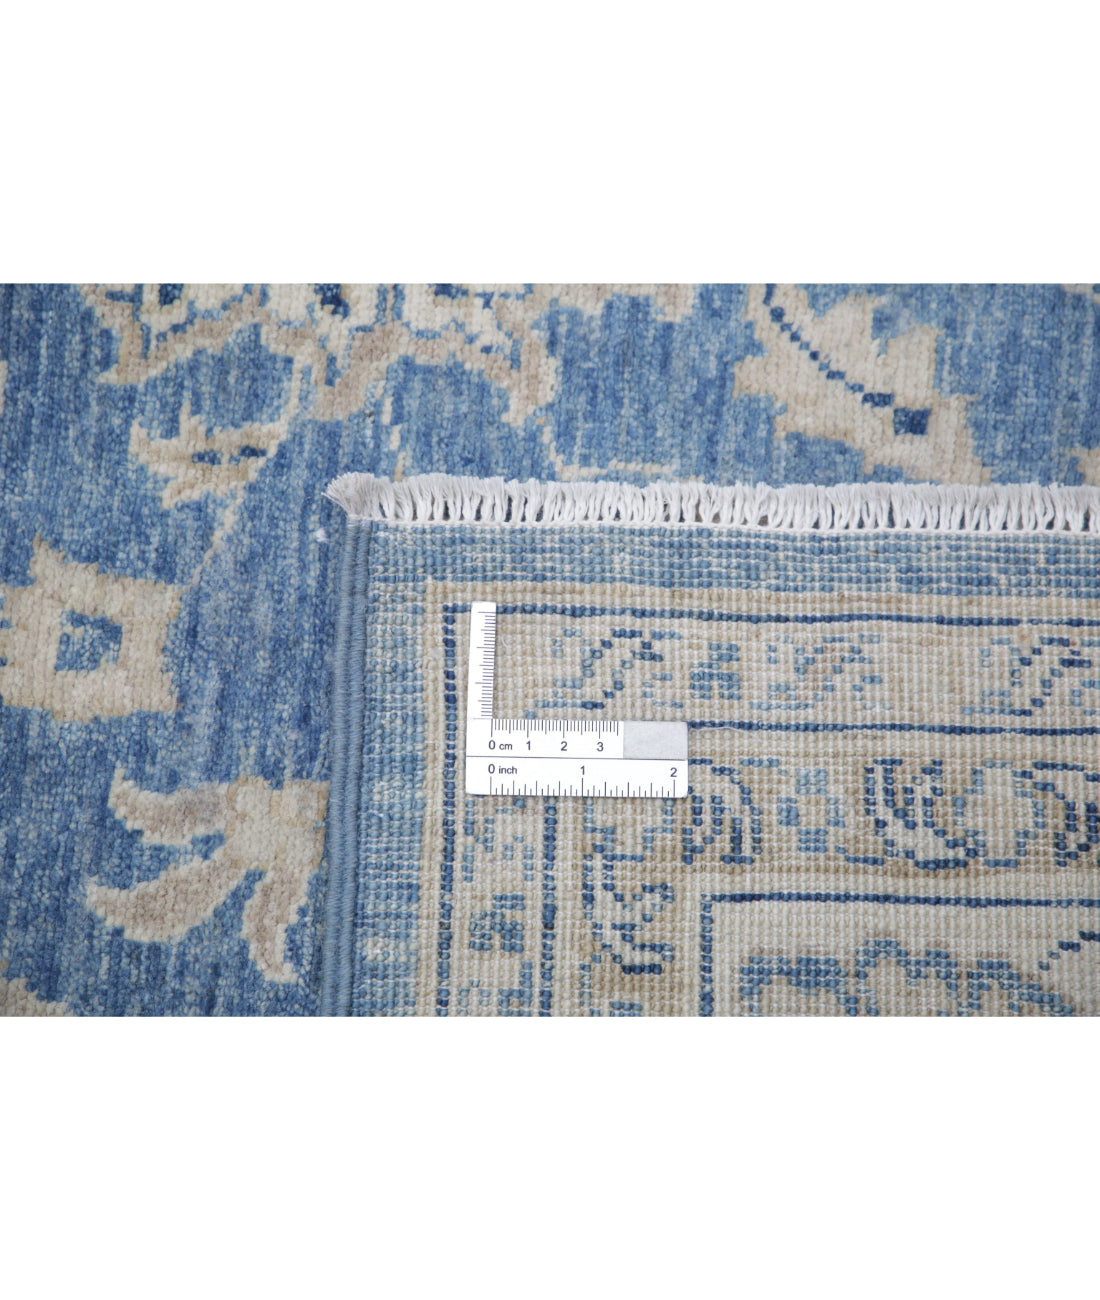 Hand Knotted Serenity Wool Rug - 4'9'' x 6'9'' 4'9'' x 6'9'' (143 X 203) / Blue / Ivory